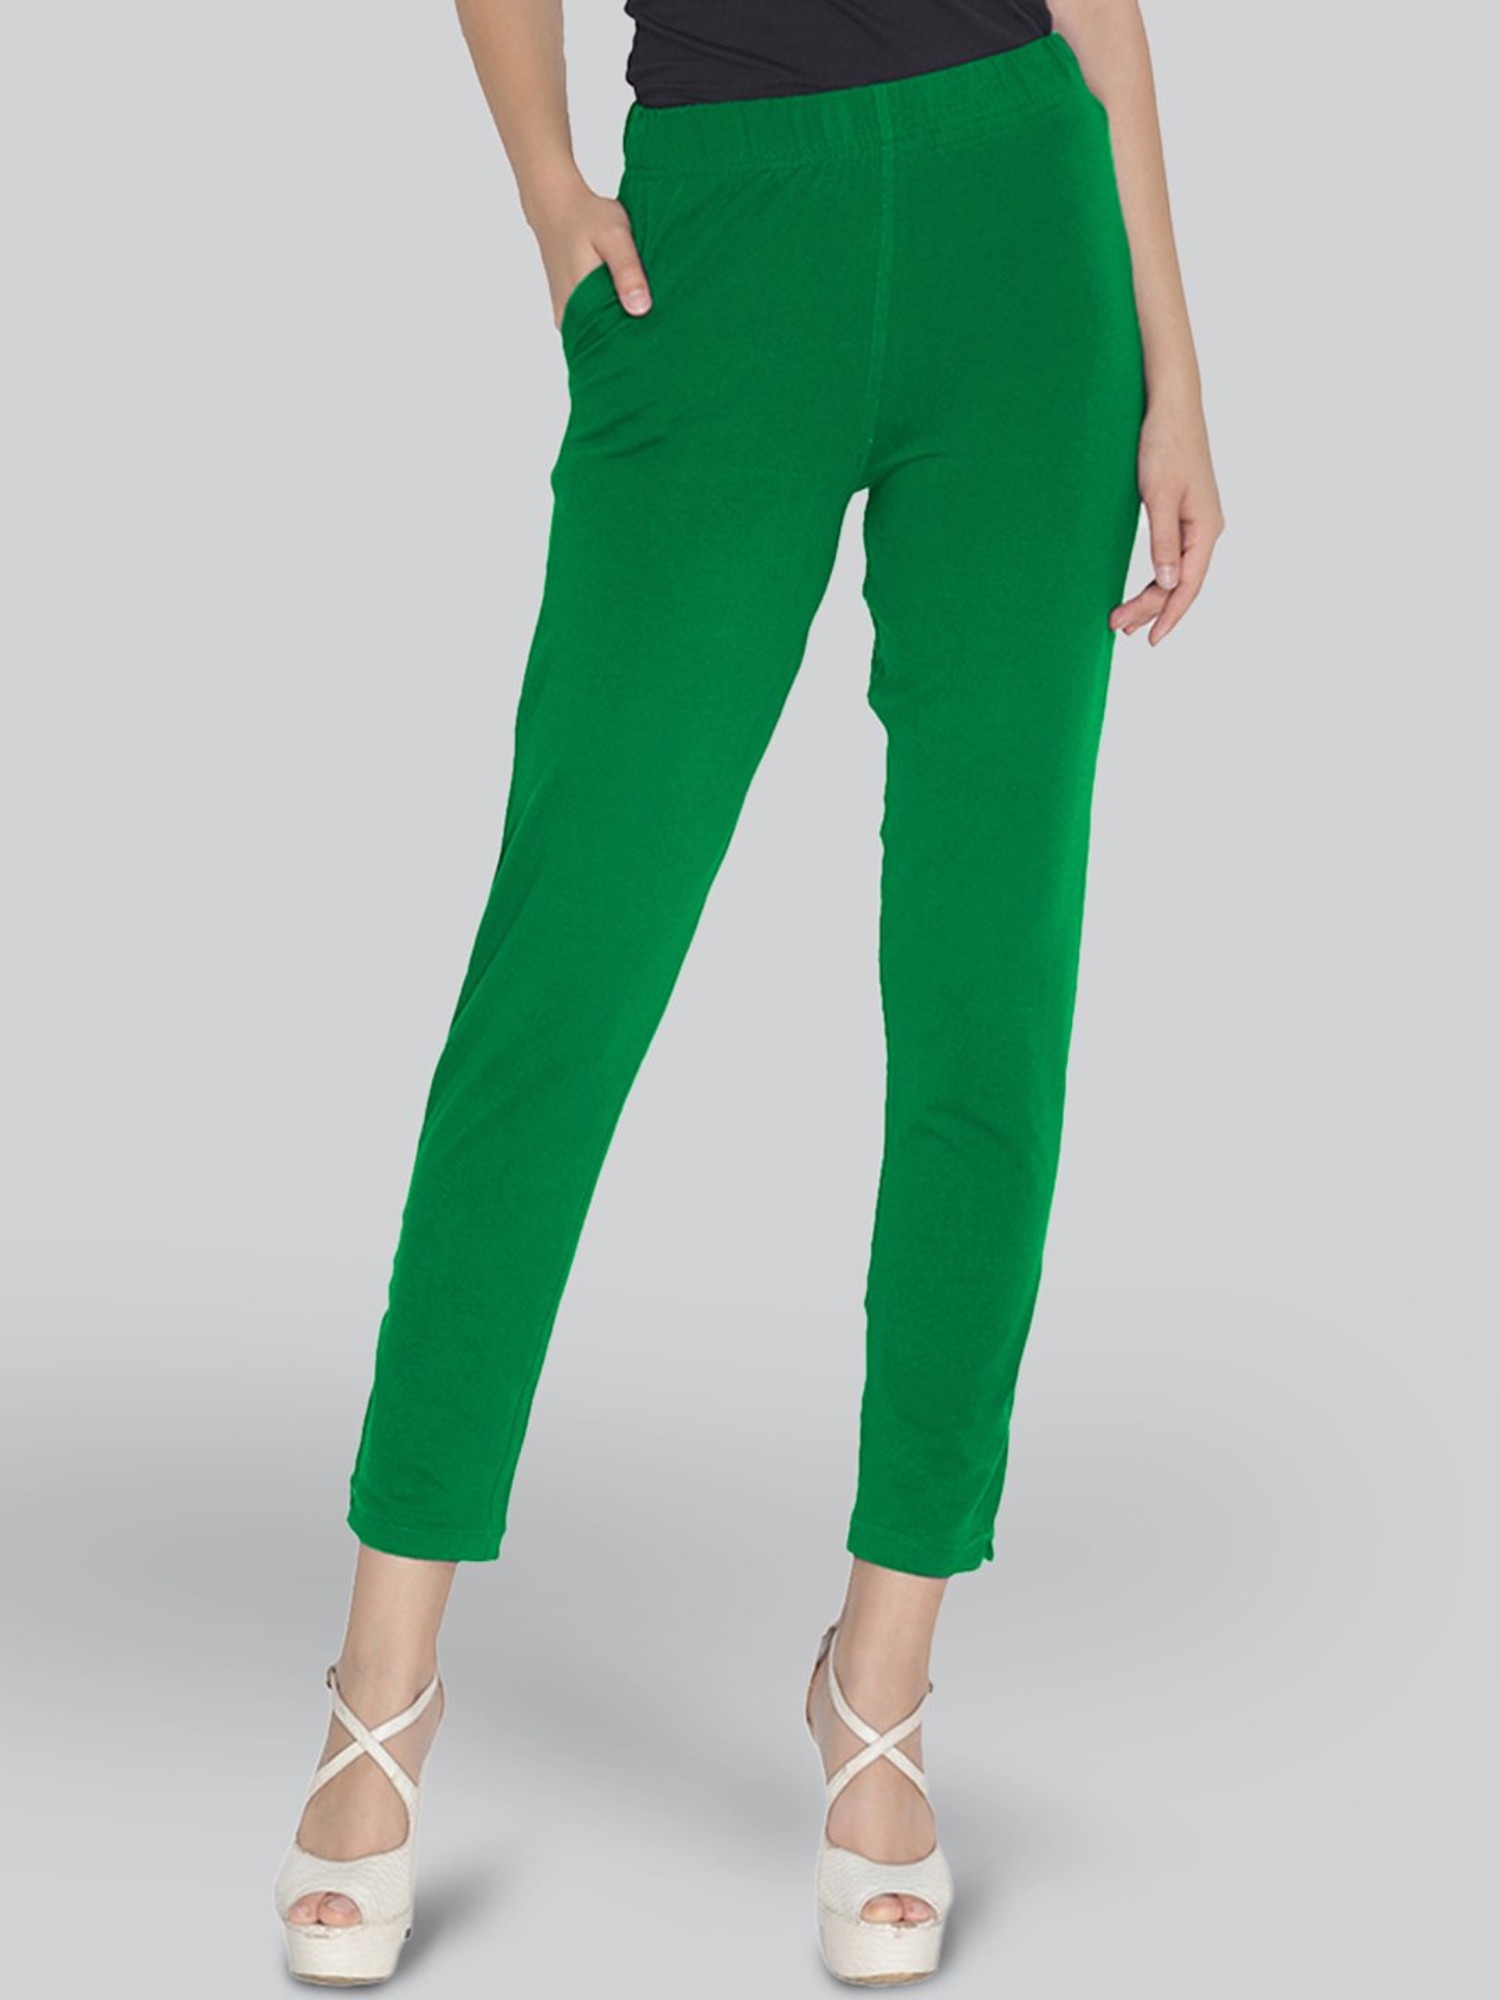 Buy BIBA Womens Solid Ankle Length Straight Pants | Shoppers Stop